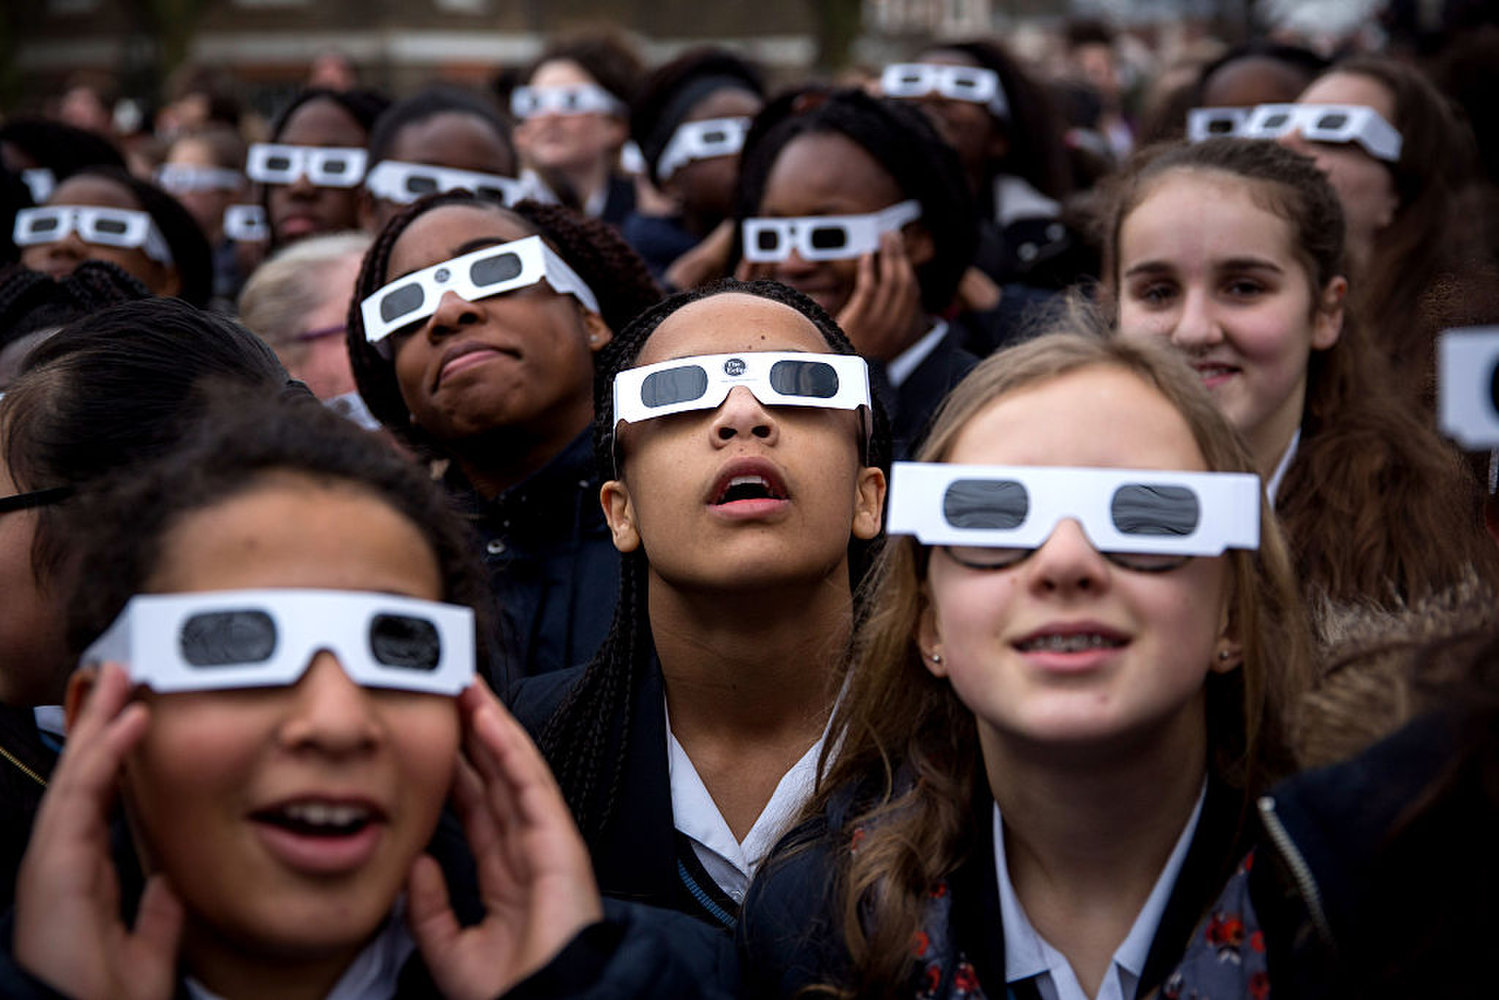 LONDON, UNITED KINGDOM - MARCH 20: Students from Saint Ursula's Covent Secondary School in Greenwich pose for a photograph wearing protective glasses at the Royal Observatory Greenwich on March 20, 2015 in London, England. Hundreds of. 						
						</div>
						
						
										<a href=